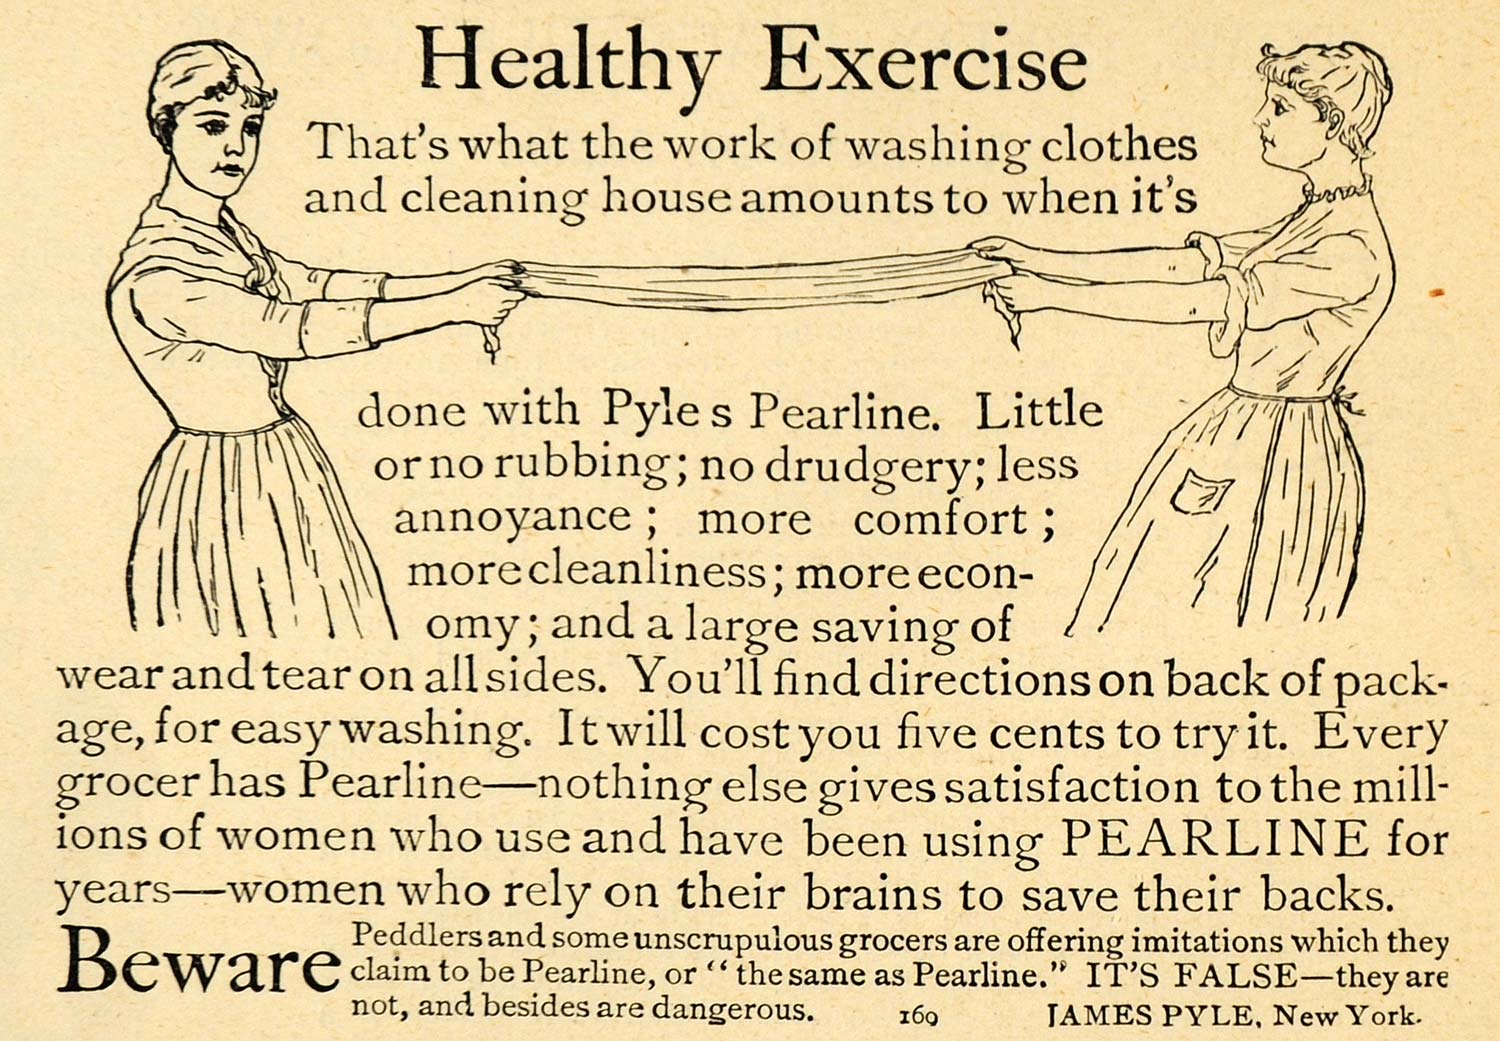 1891 Ad Exercise Washing Clothes James Pyle Pearline - ORIGINAL ADVERTISING LHJ3